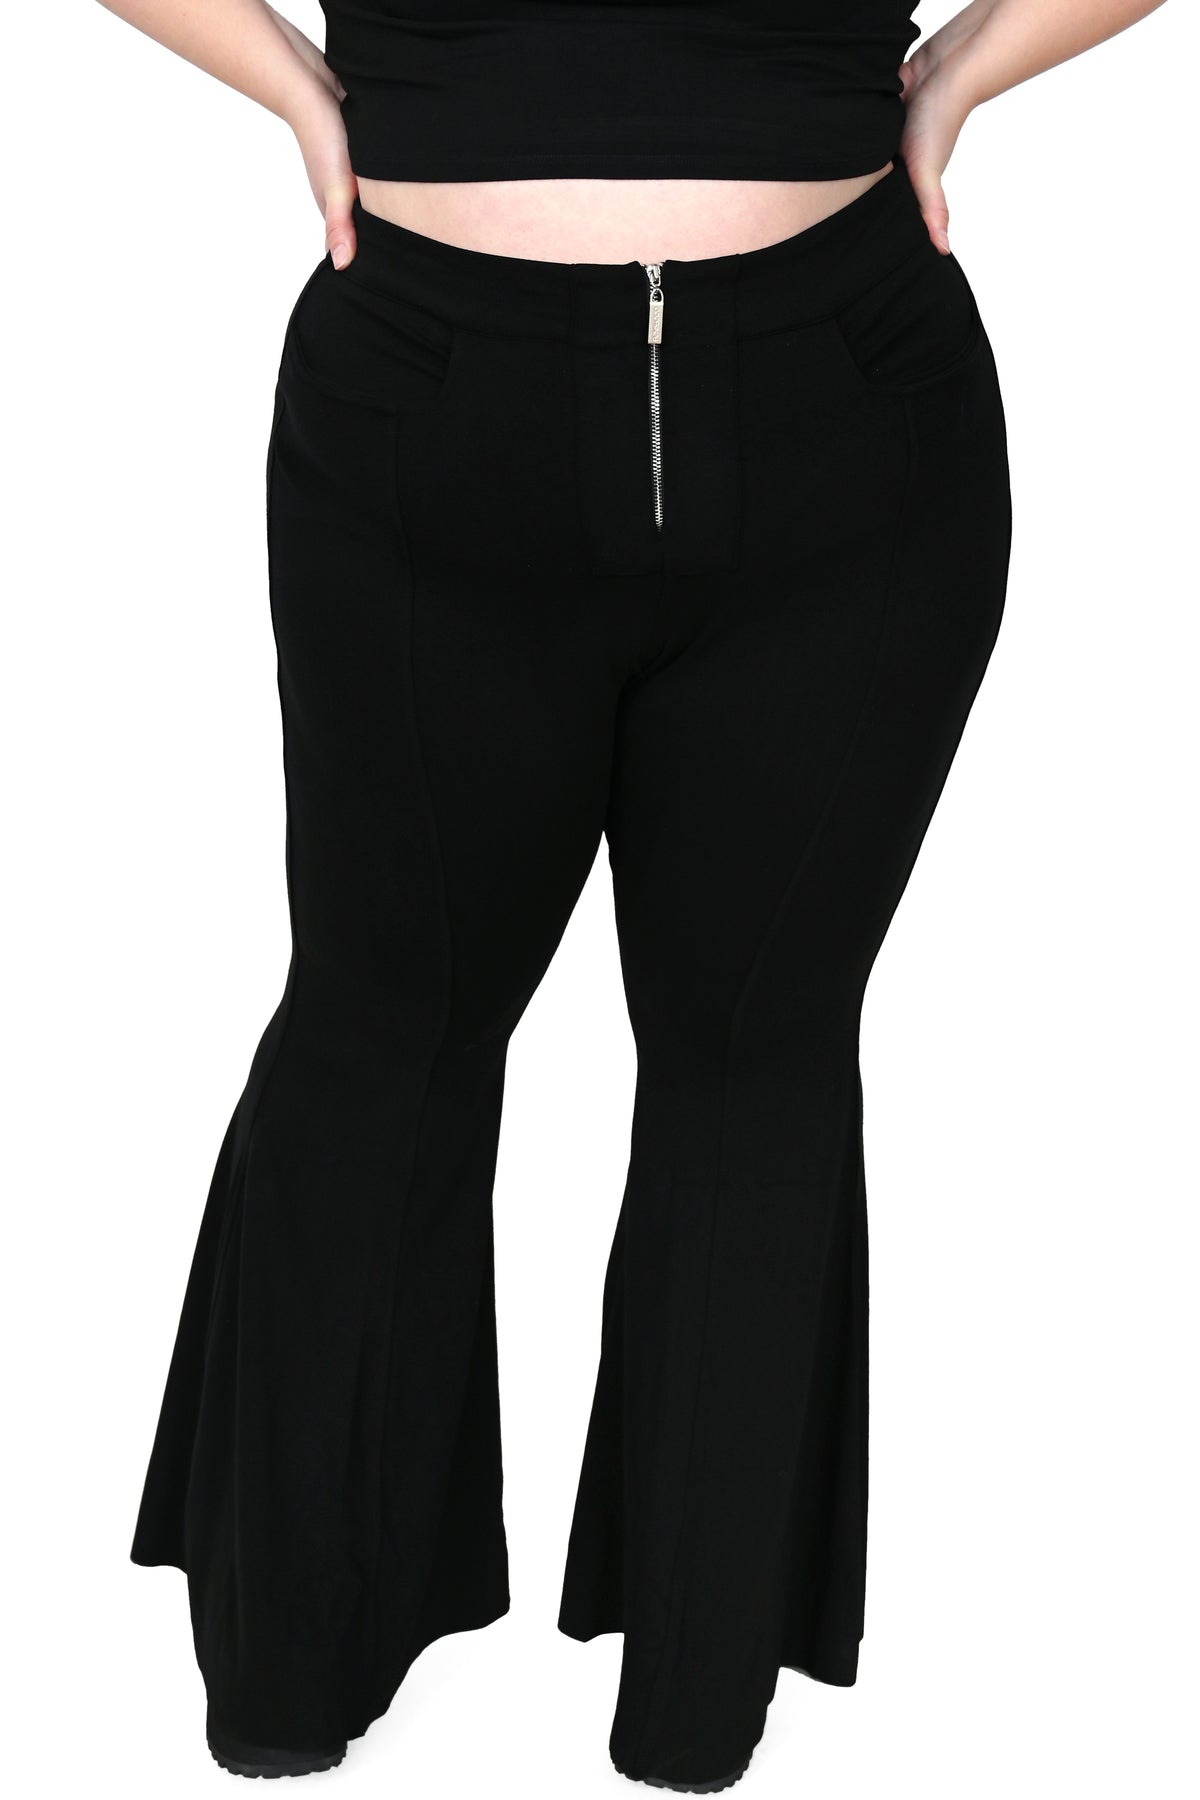 black bellbottoms with a silver front zipper